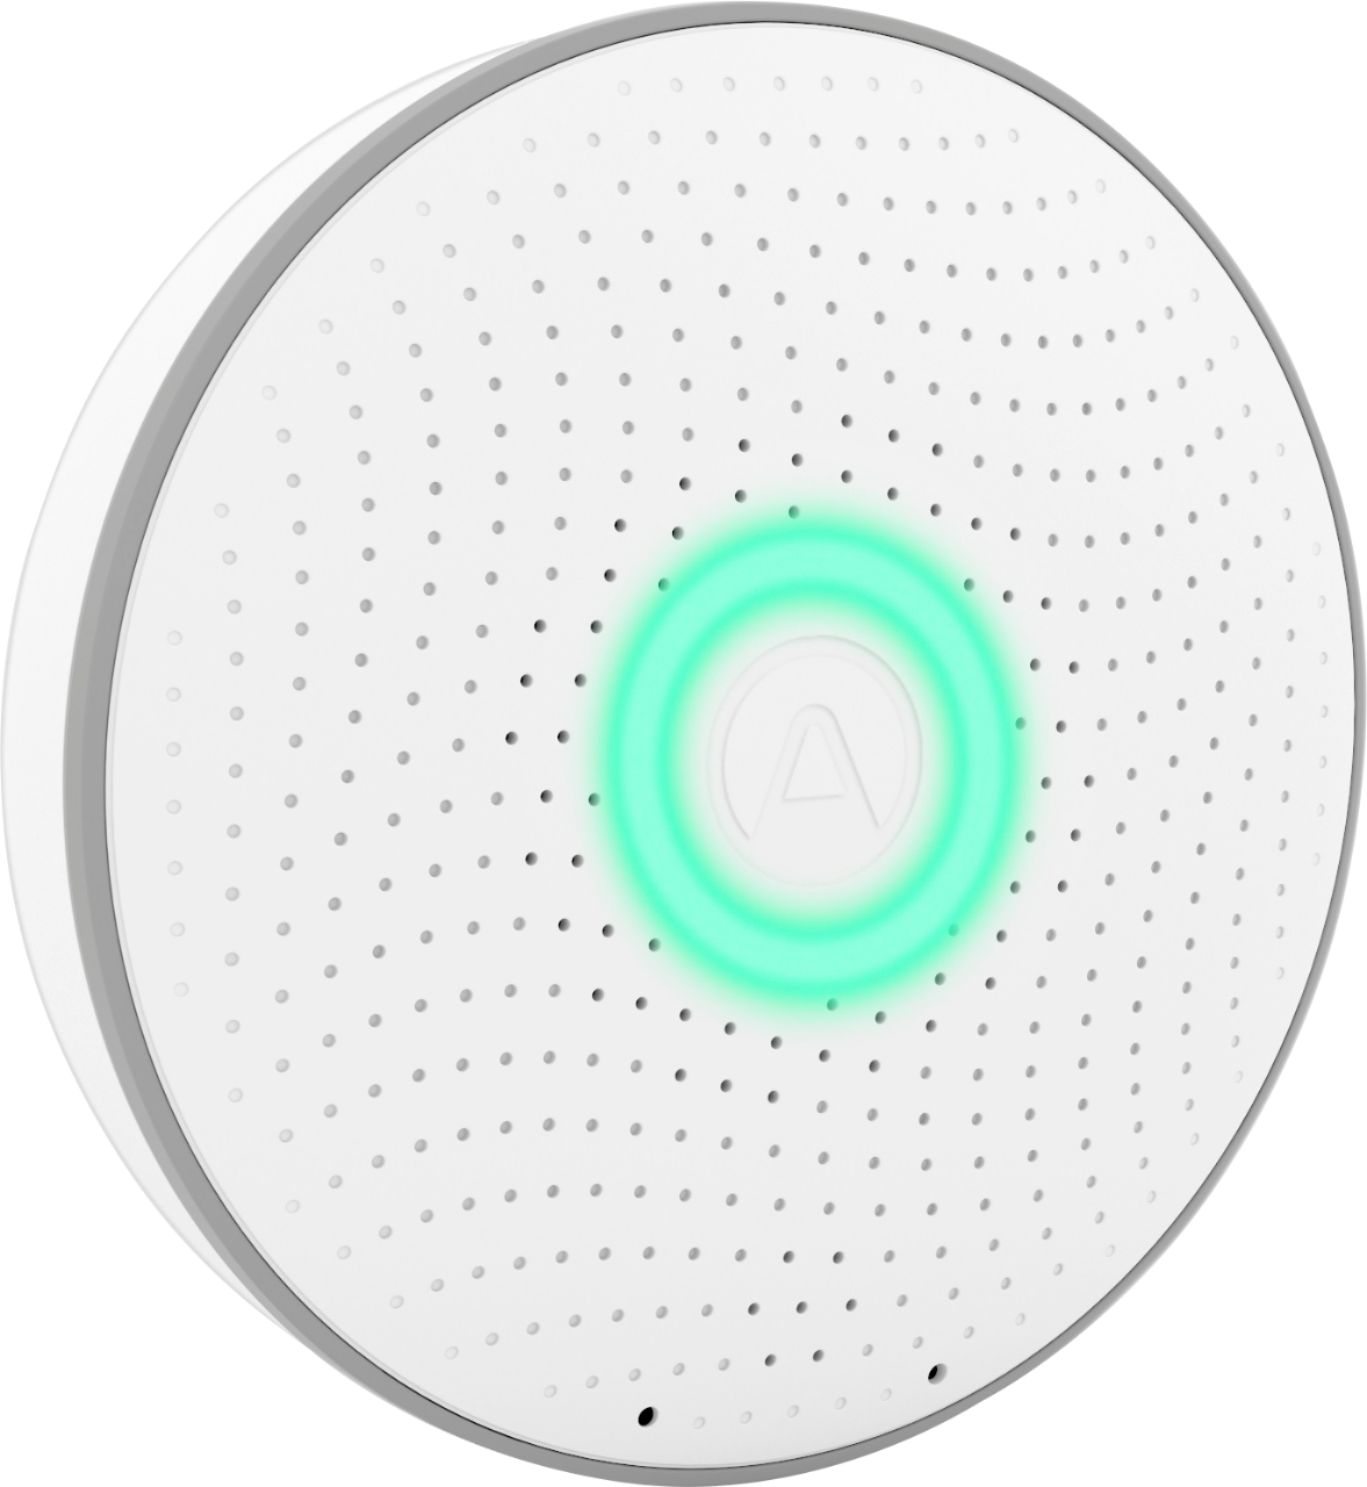 Angle View: Airthings - House Kit, Radon and Indoor Air Quality Monitoring System, Multi-room - White